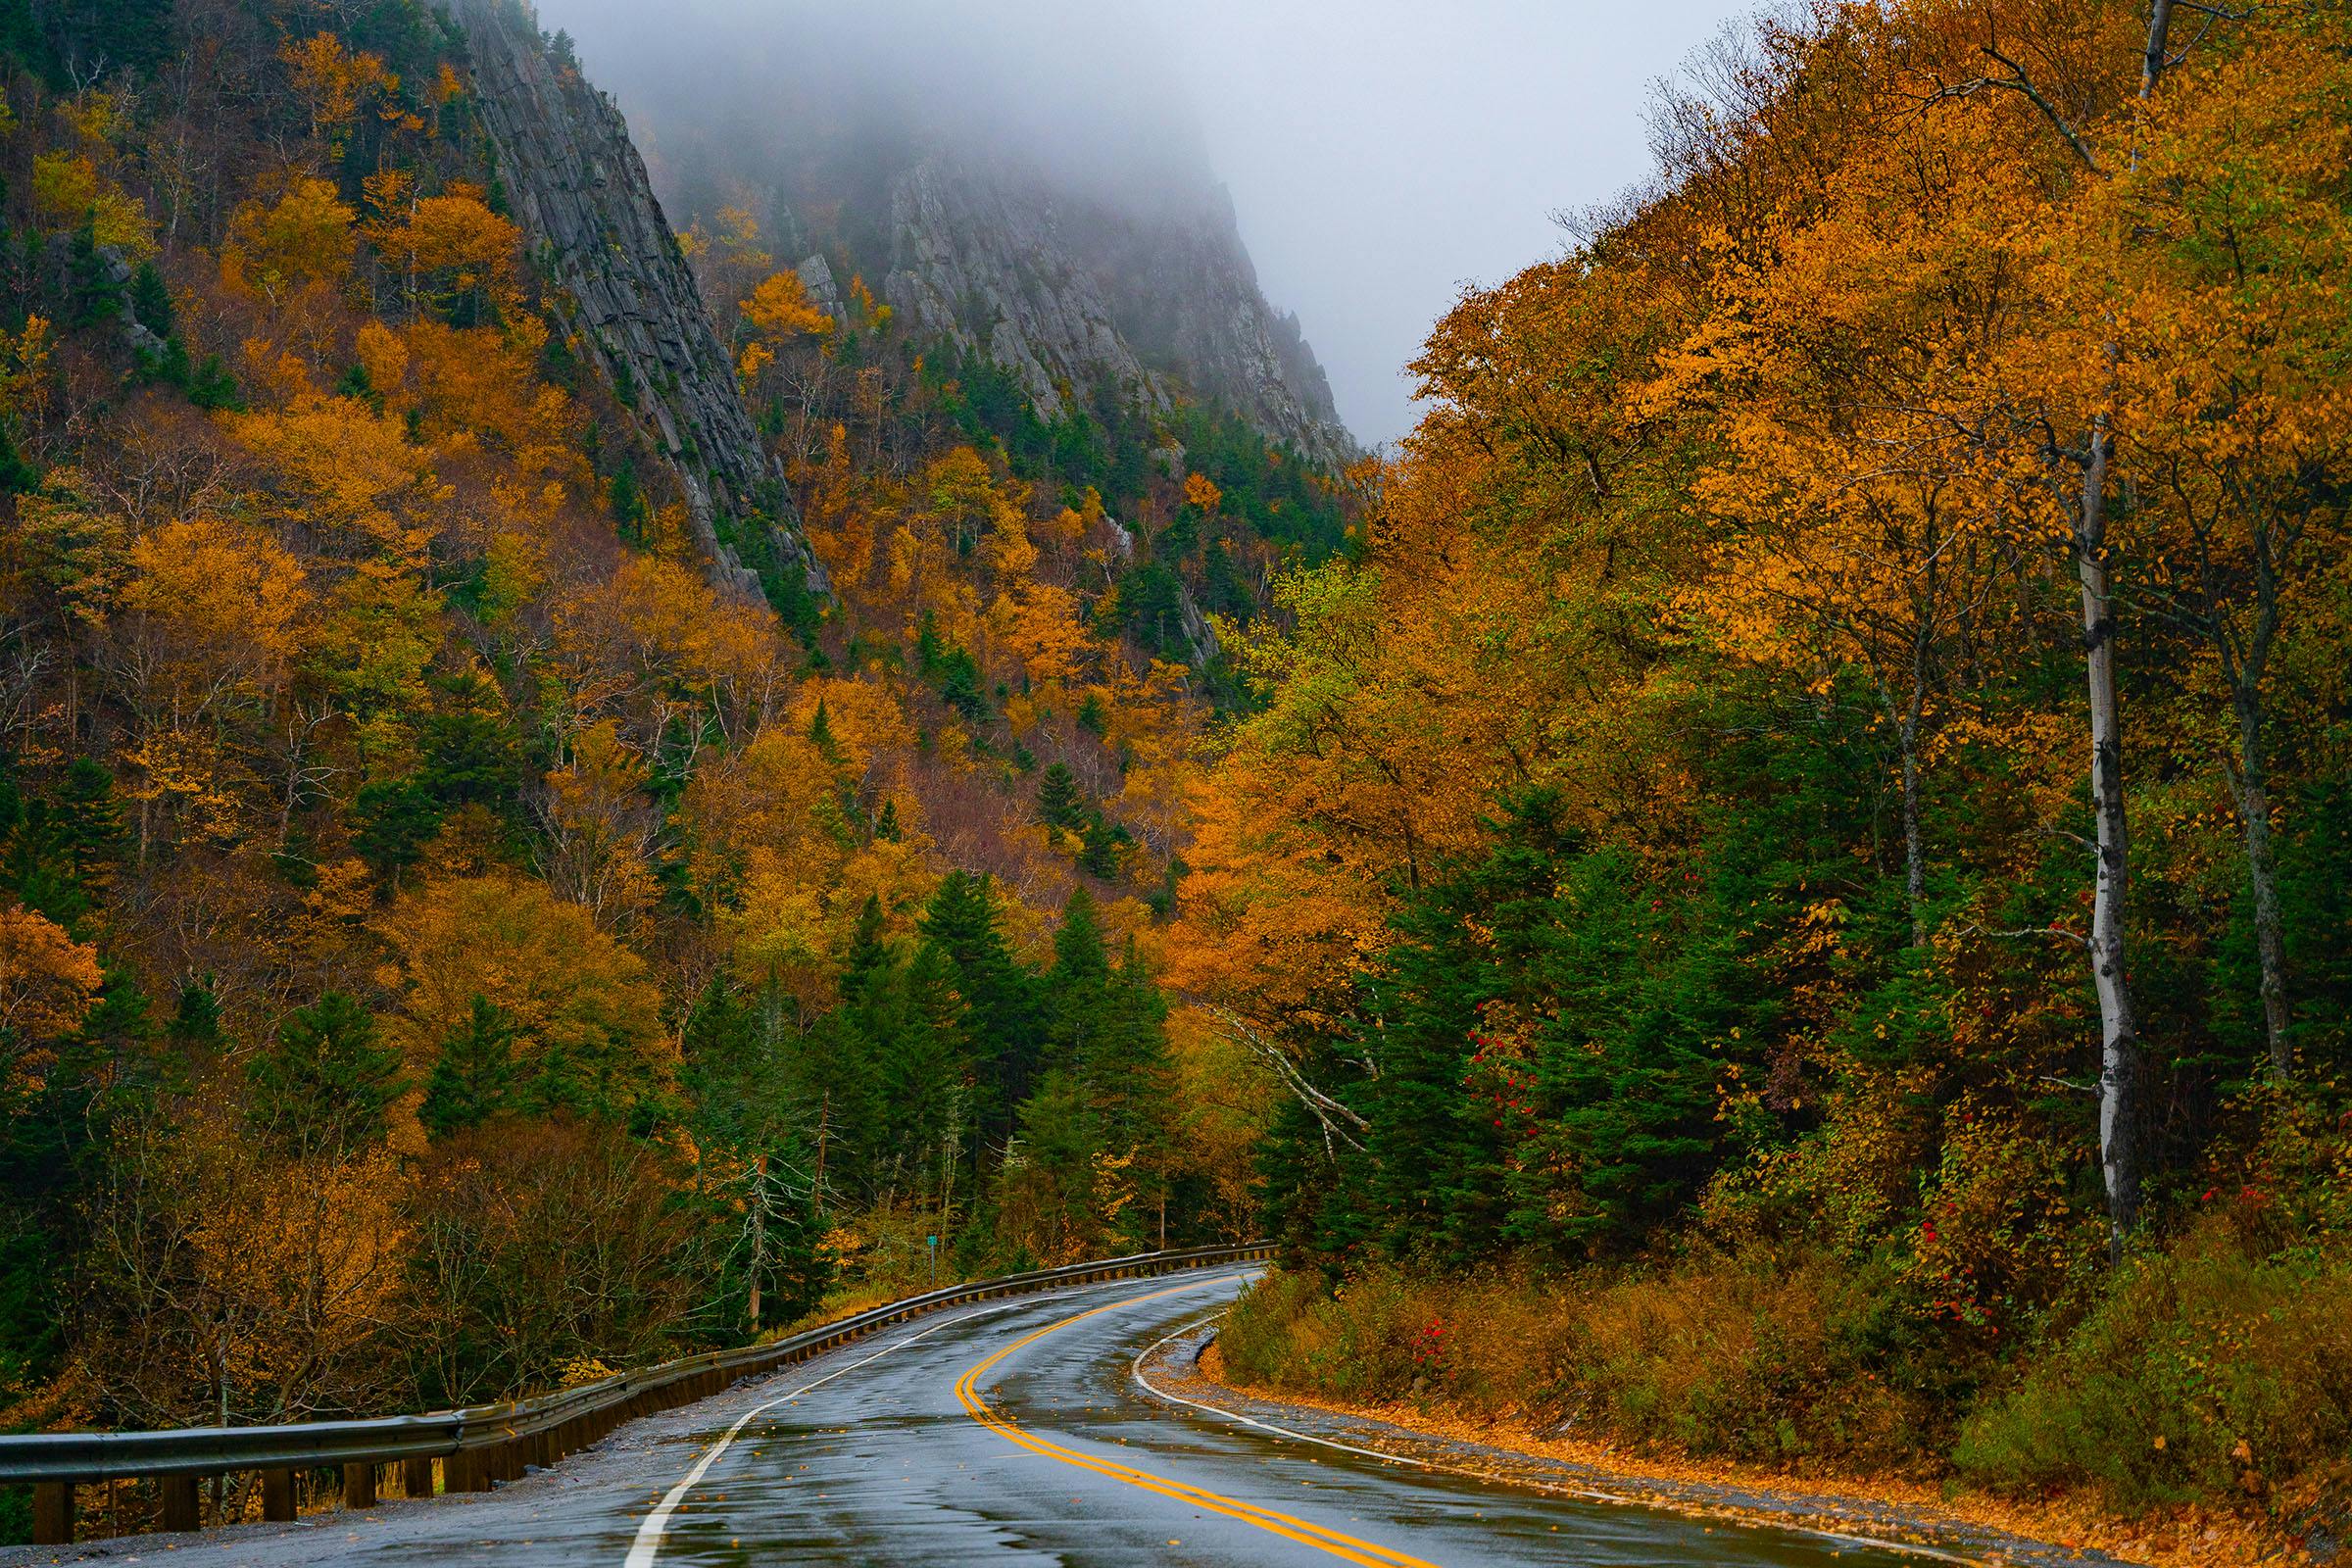 A wet, winding road lined by colorful trees.